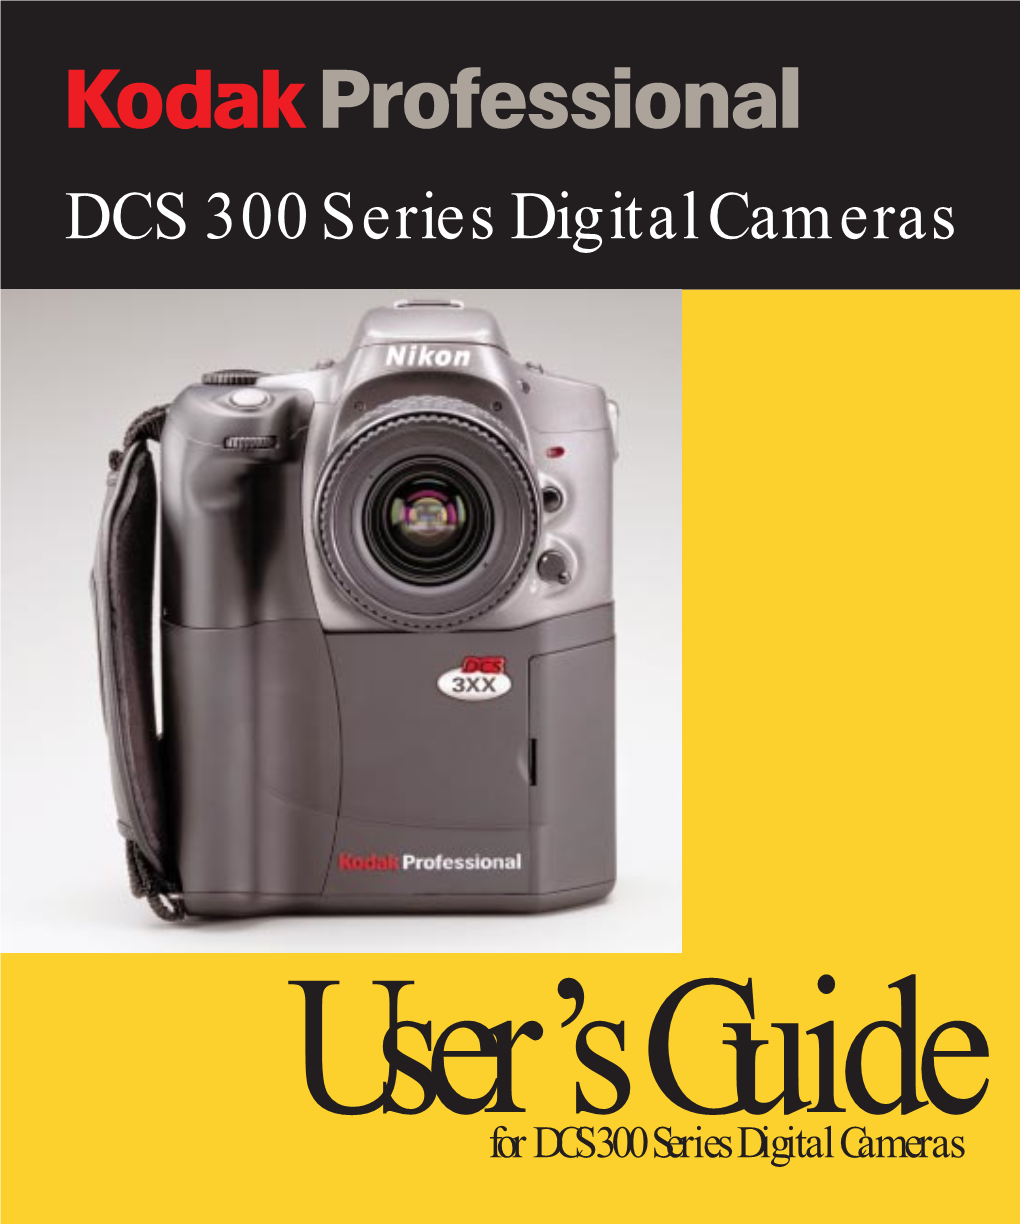 Dcs 300 Series Digital Cameras; User's Guide-English; Front Cover 6B0935 a Trim Size: 7.5 (W) X 9.0 (H) Inches M